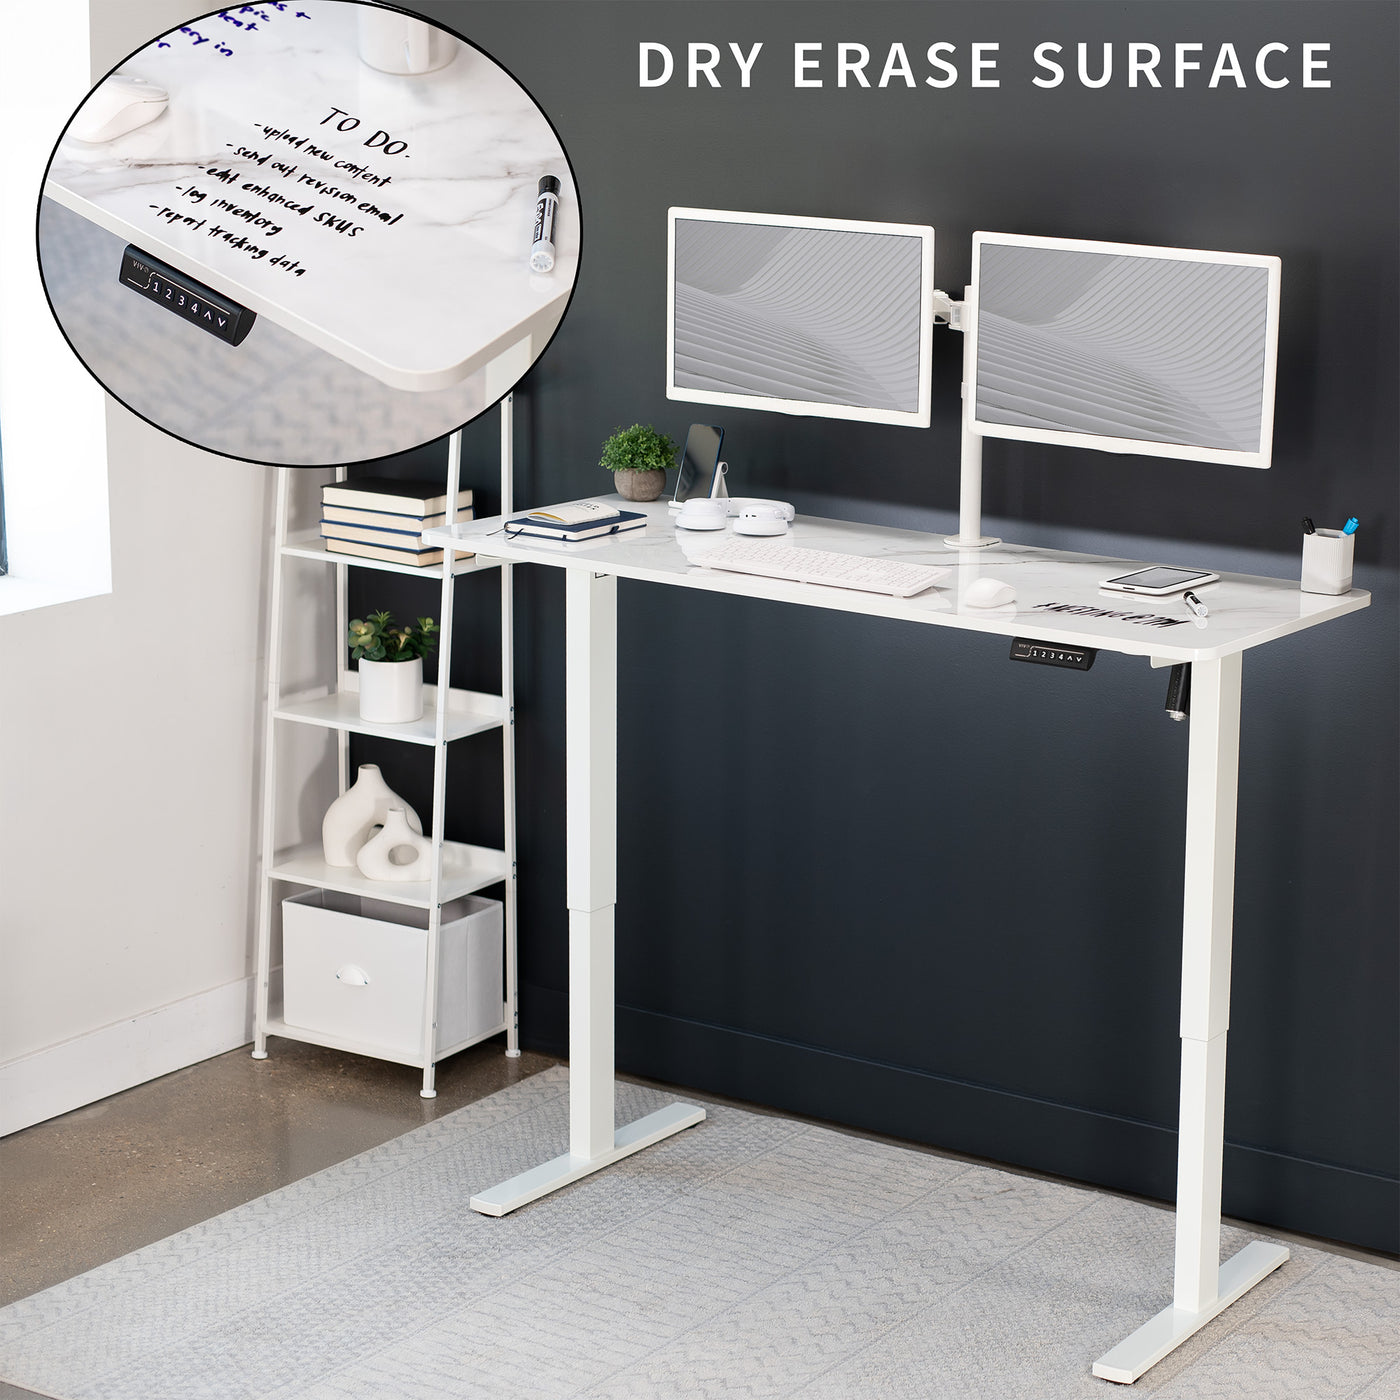 Sturdy ergonomic dry erase sit or stand active whiteboard desk workstation with adjustable height using smart control panel.